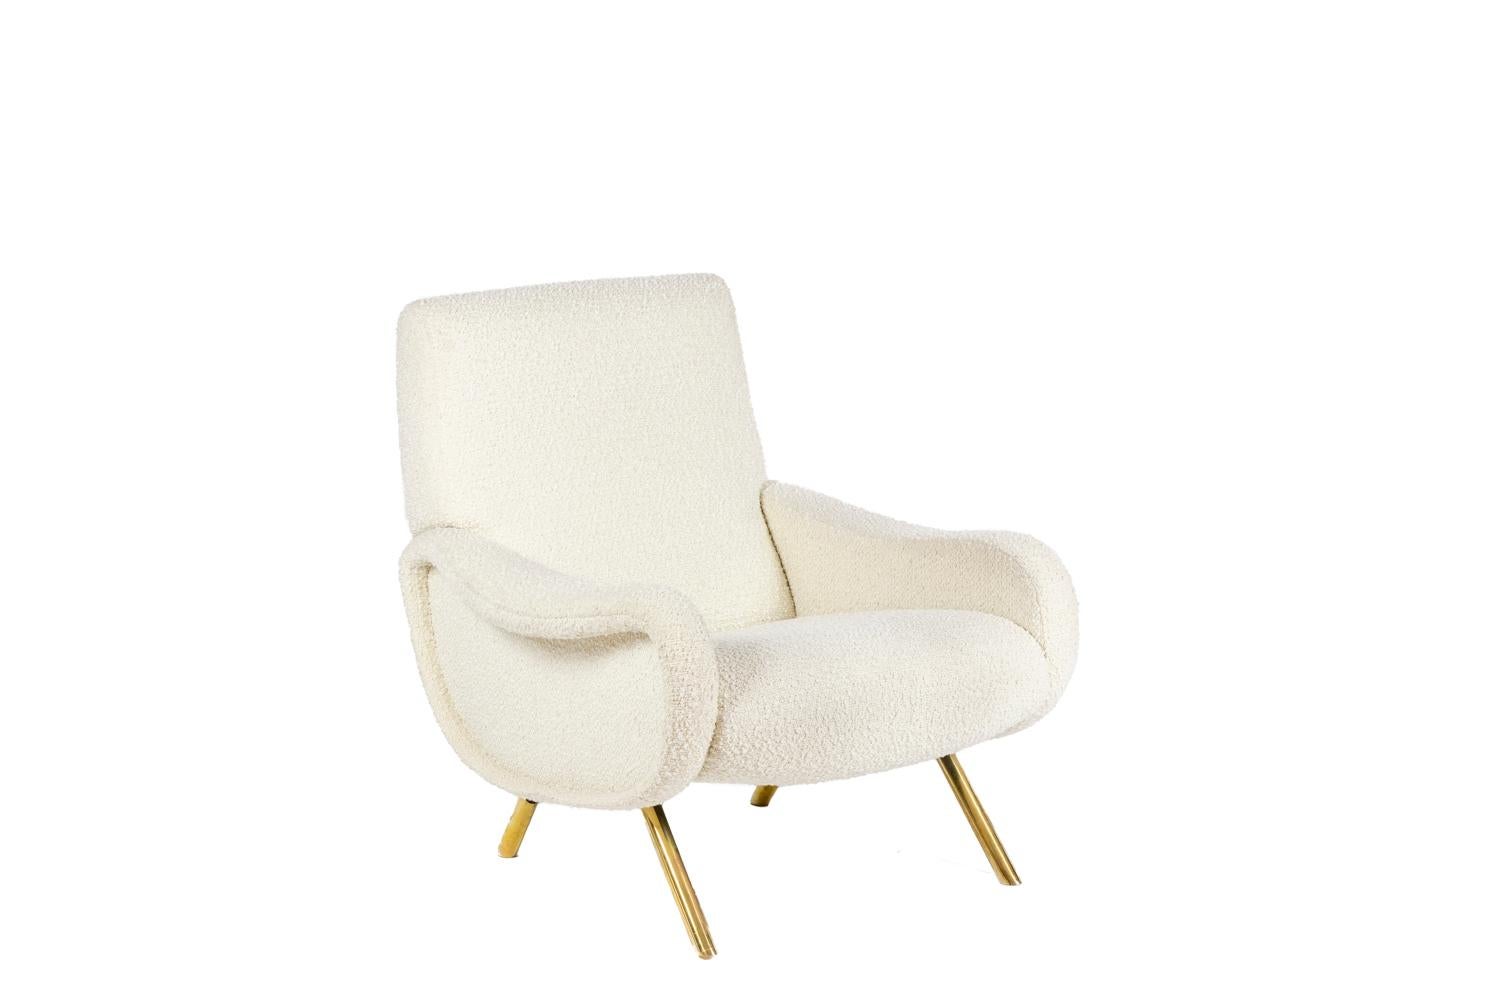 Marco Zanuso, attributed to. 
Artflex, edited by. 

Pair of armchairs, model “Lady”. Base in brass. Fabric in white color.

Travail réalisé dans les années 1950.